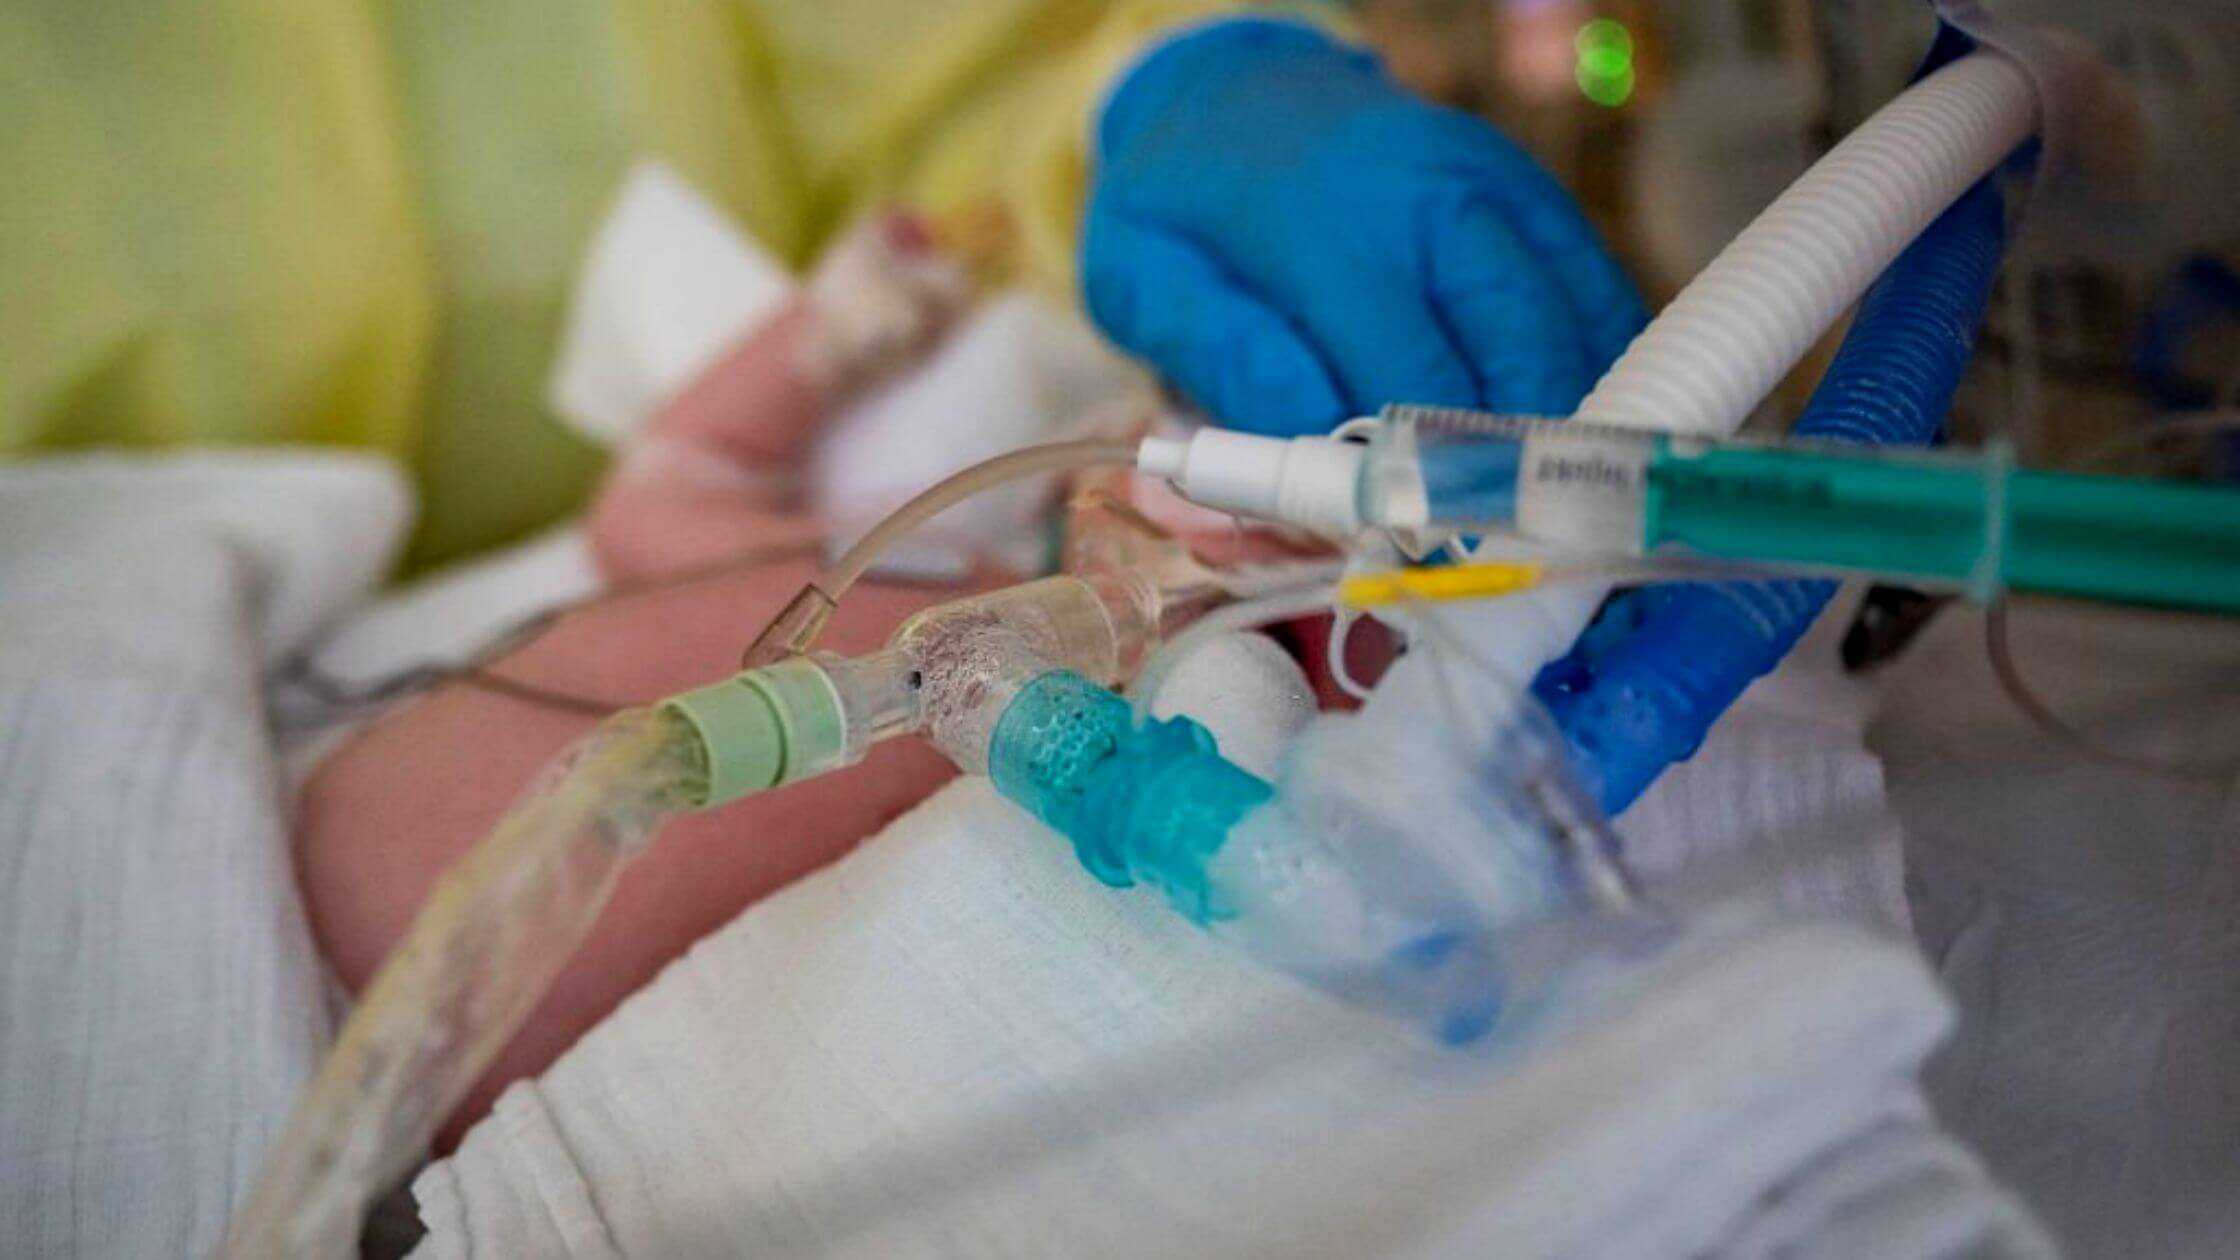 A Child Of 4 Dies From RSV-Related Illness In Riverside County